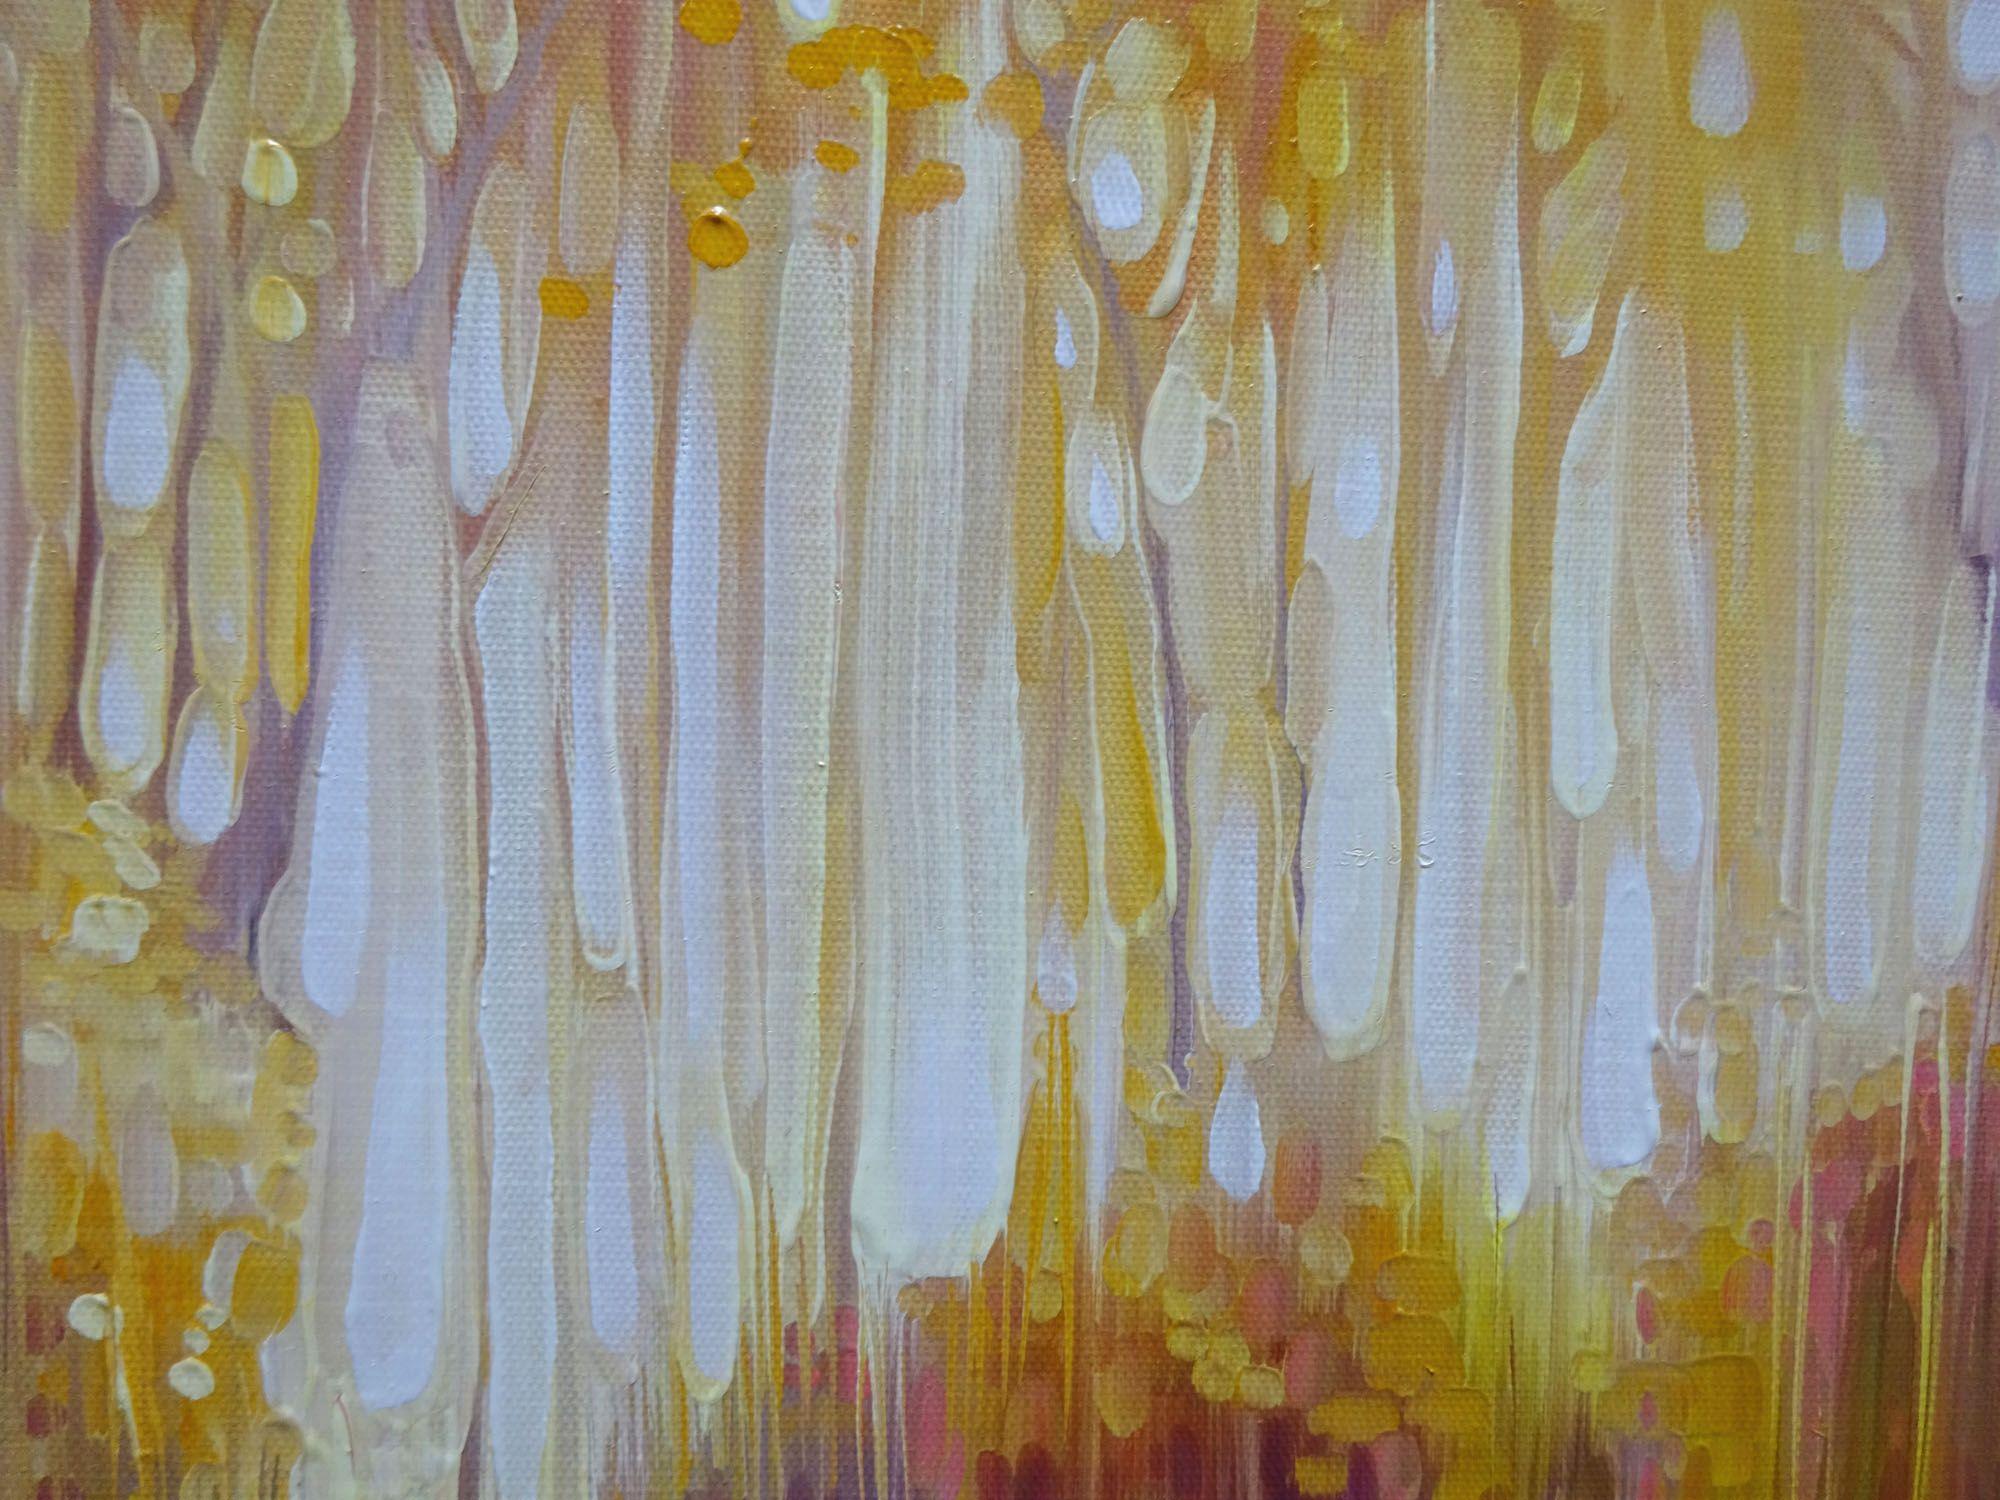 October Glows, Painting, Oil on Canvas 4